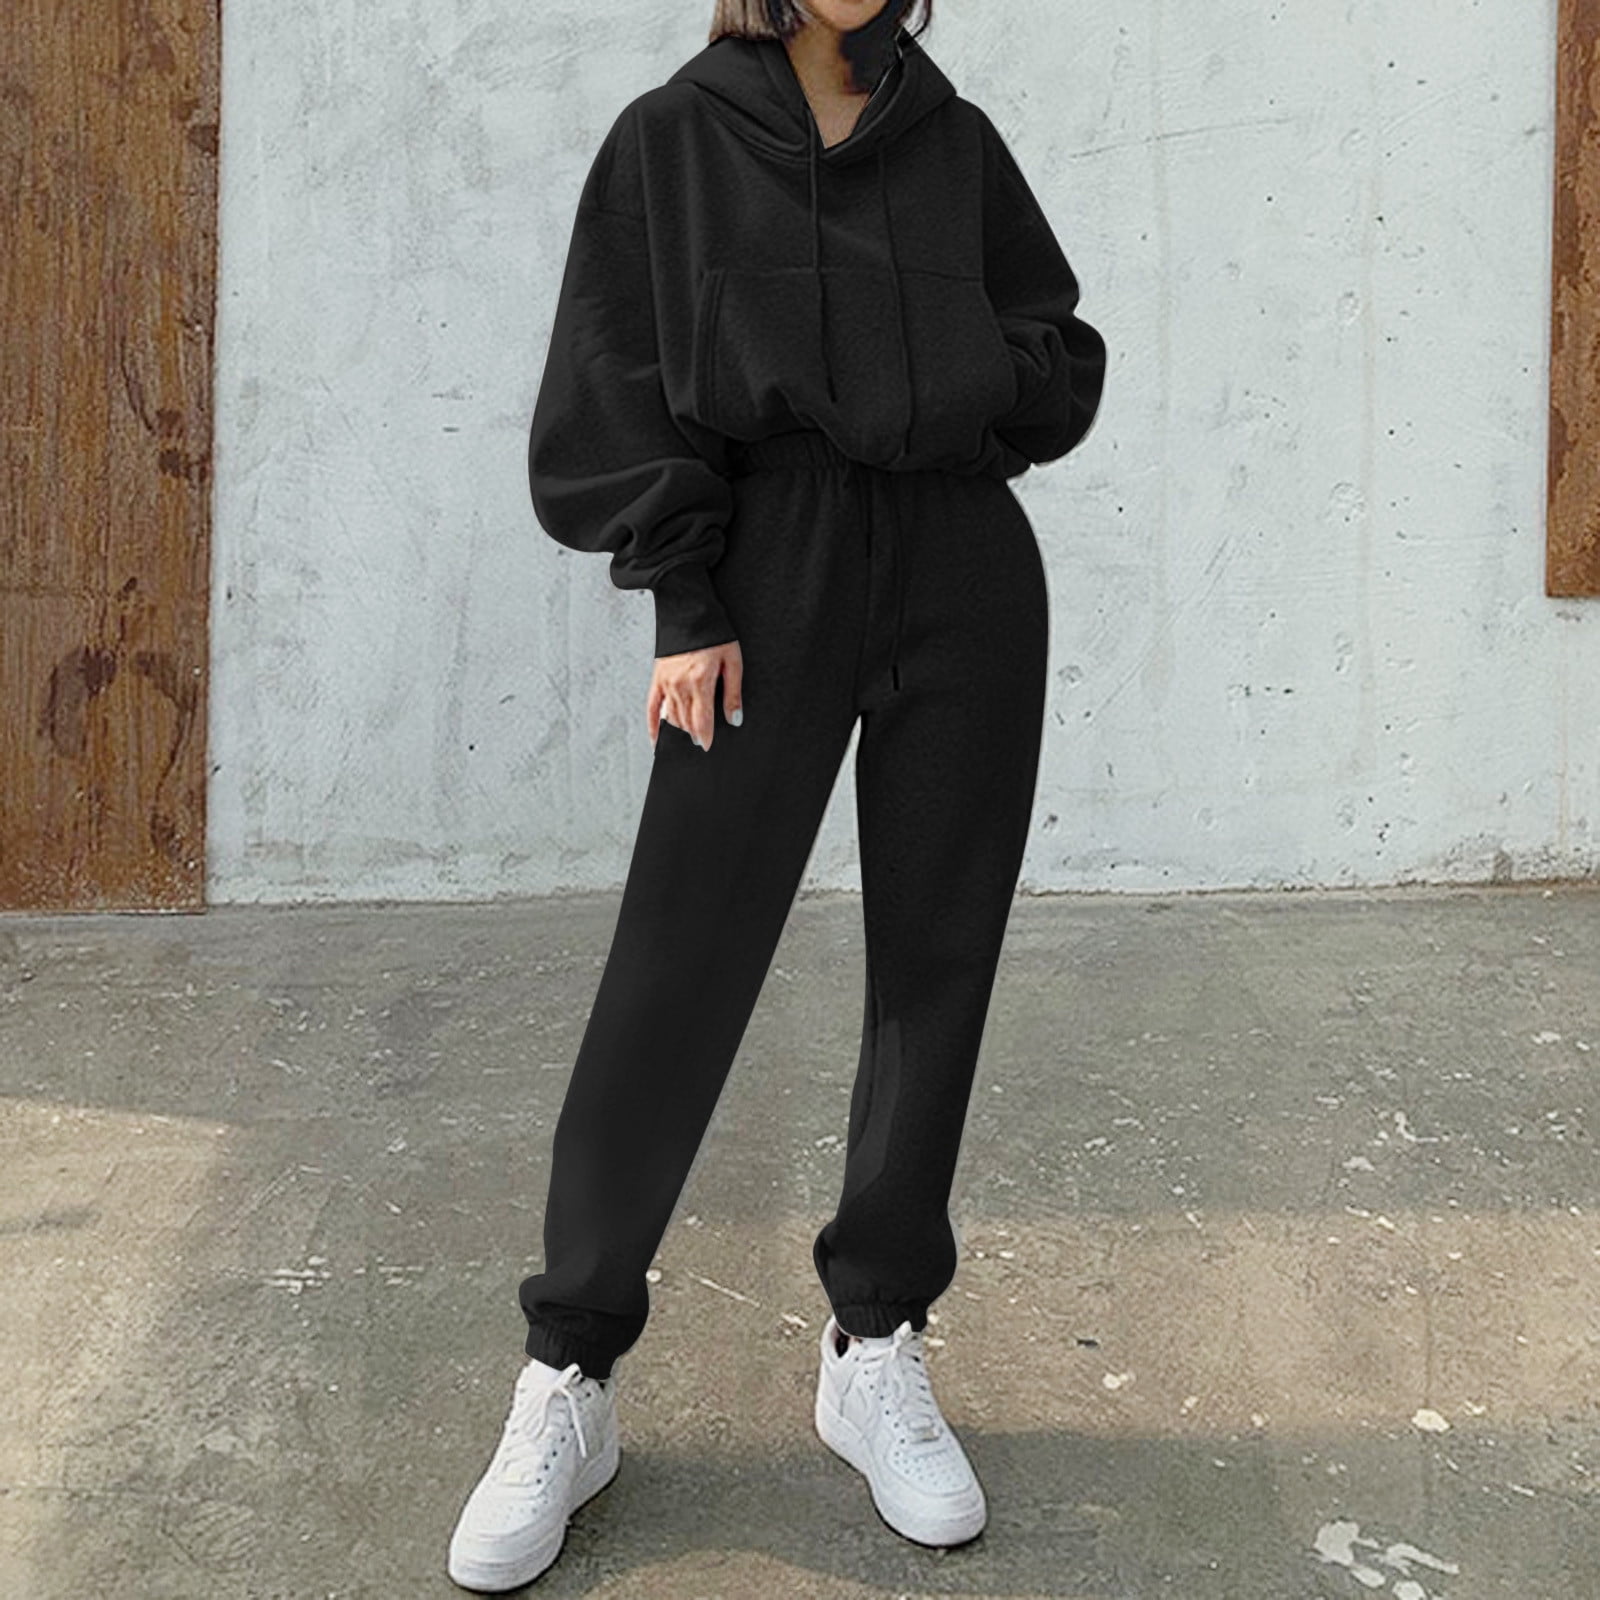 BKQCNKM Women'S Pants Women Two-Piece Hoodies Suit Winter Spring Solid  Casual Tracksuit Sports Sweatshirts Pullover Home Sweatpants Outfits  Rompers